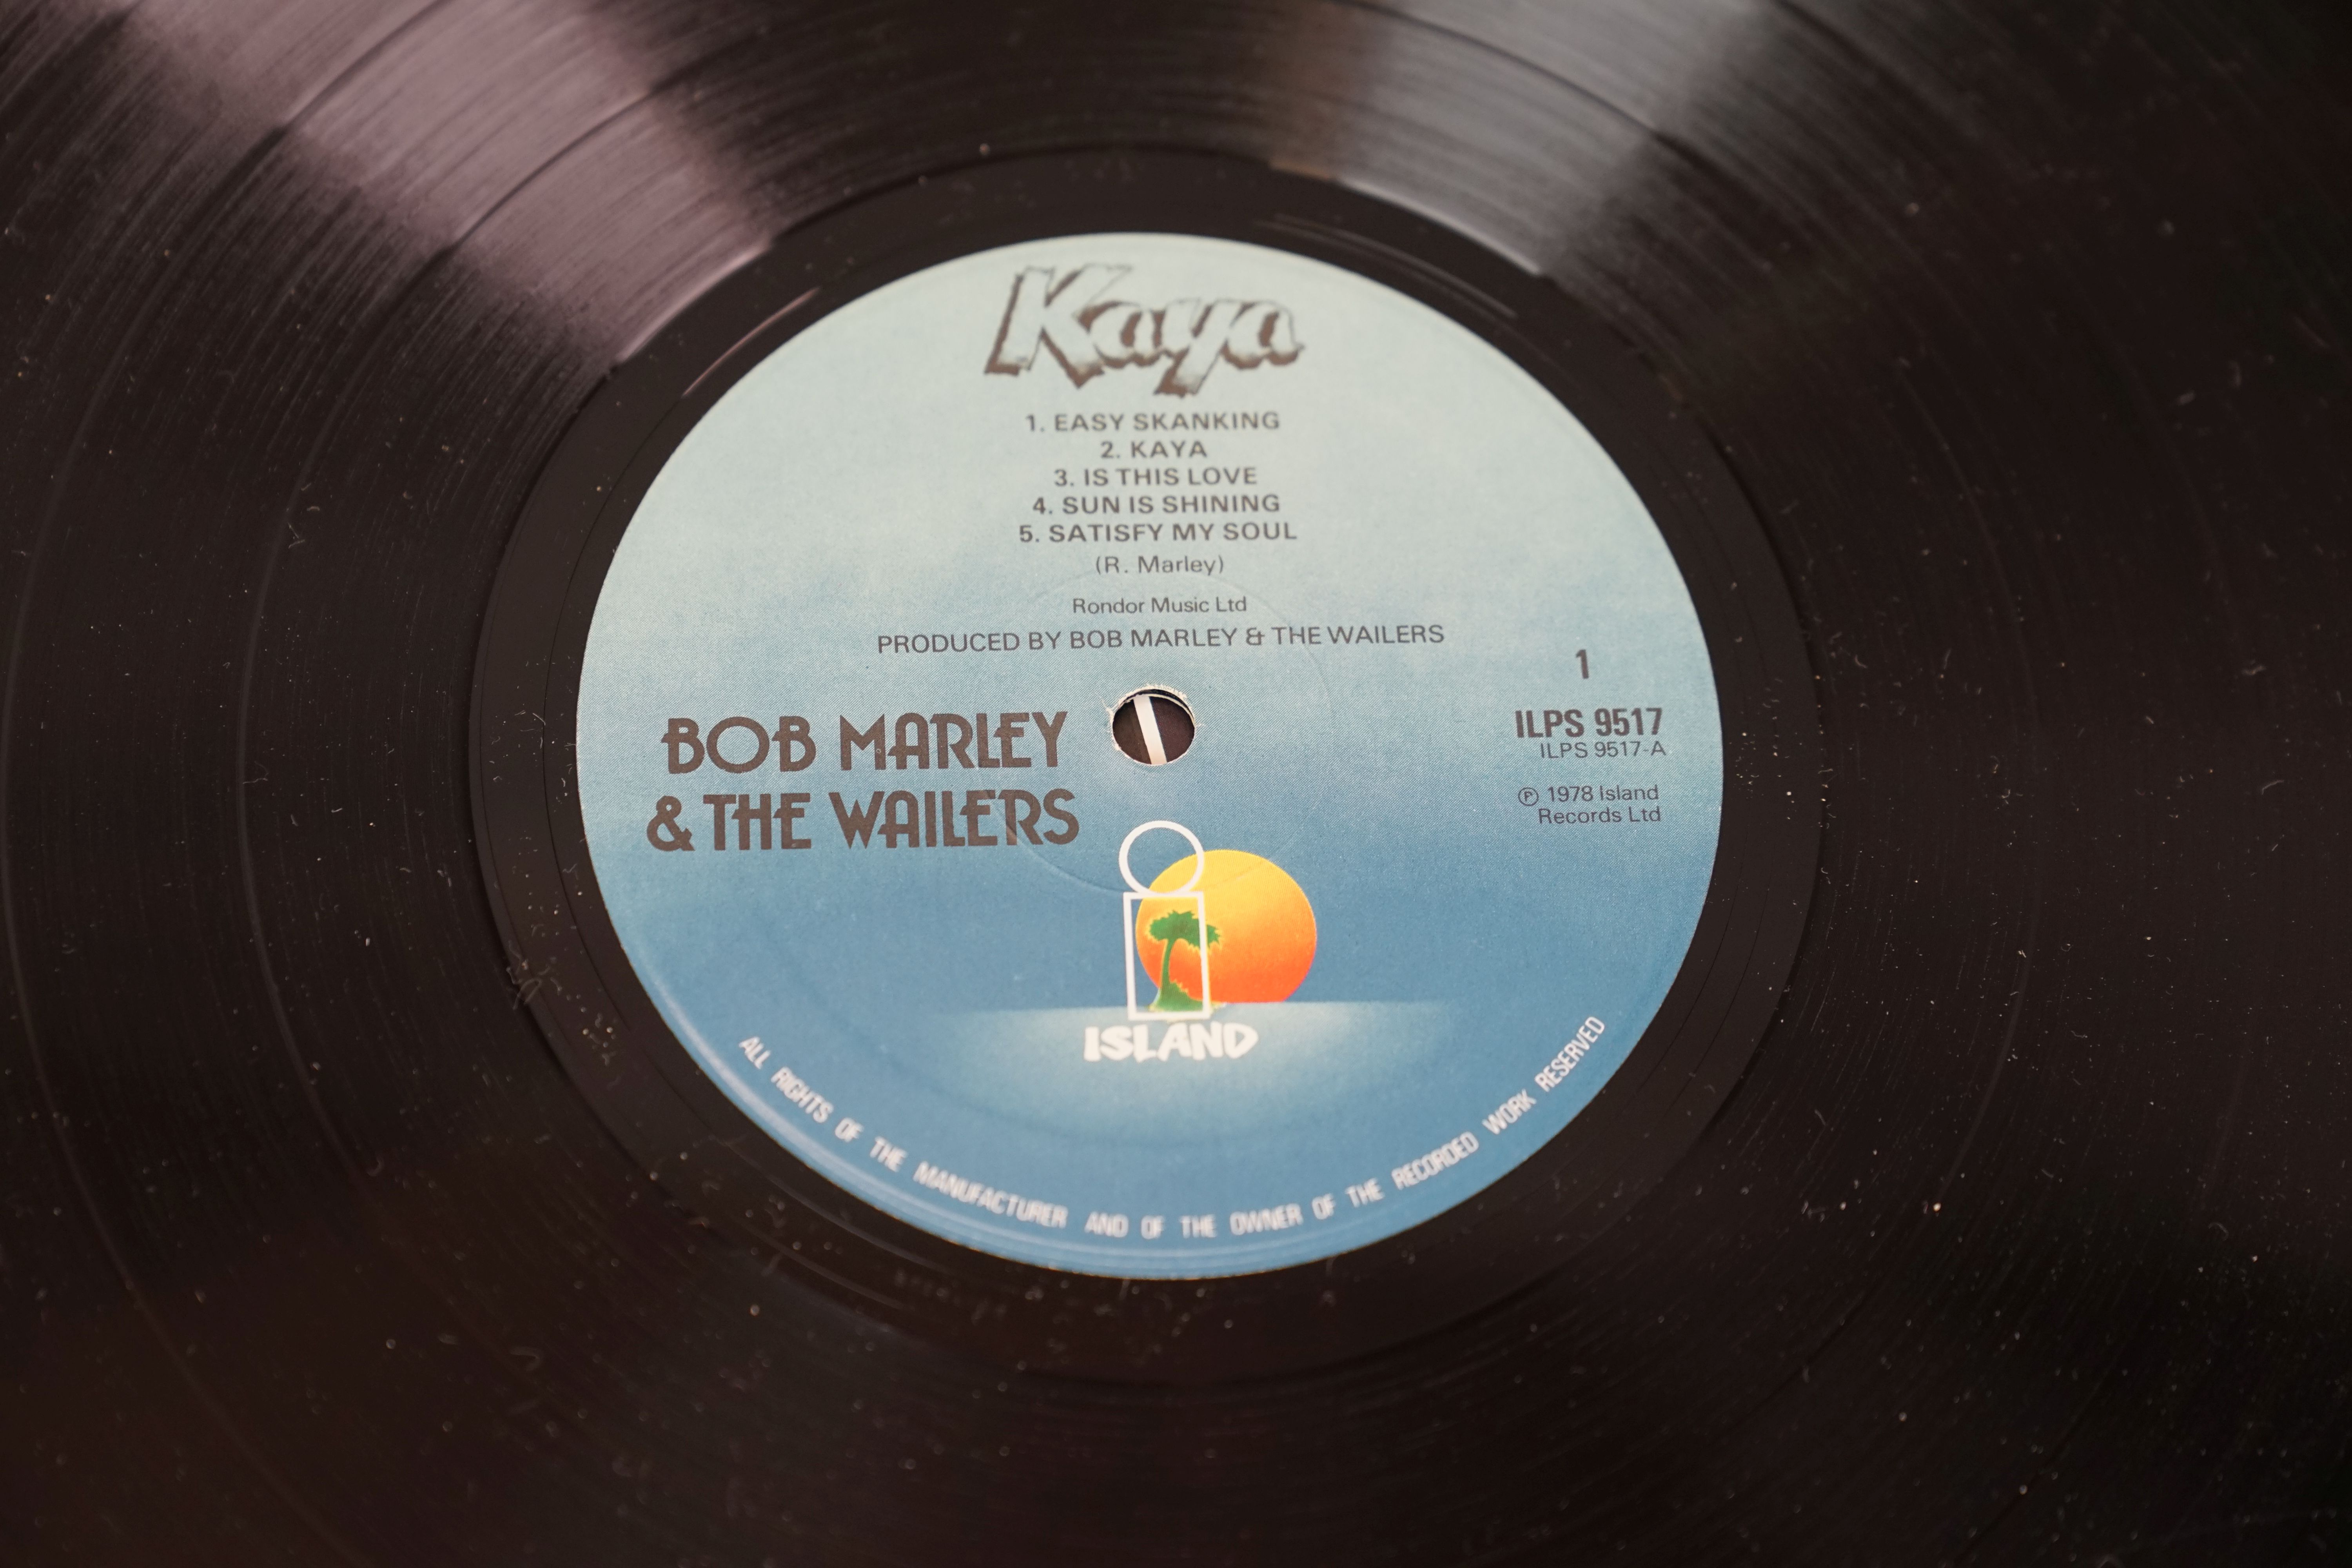 Vinyl - Small collection of 6 Bob Marley LPs to include Uprising, A Friction Herbsman, Natty - Image 19 of 39